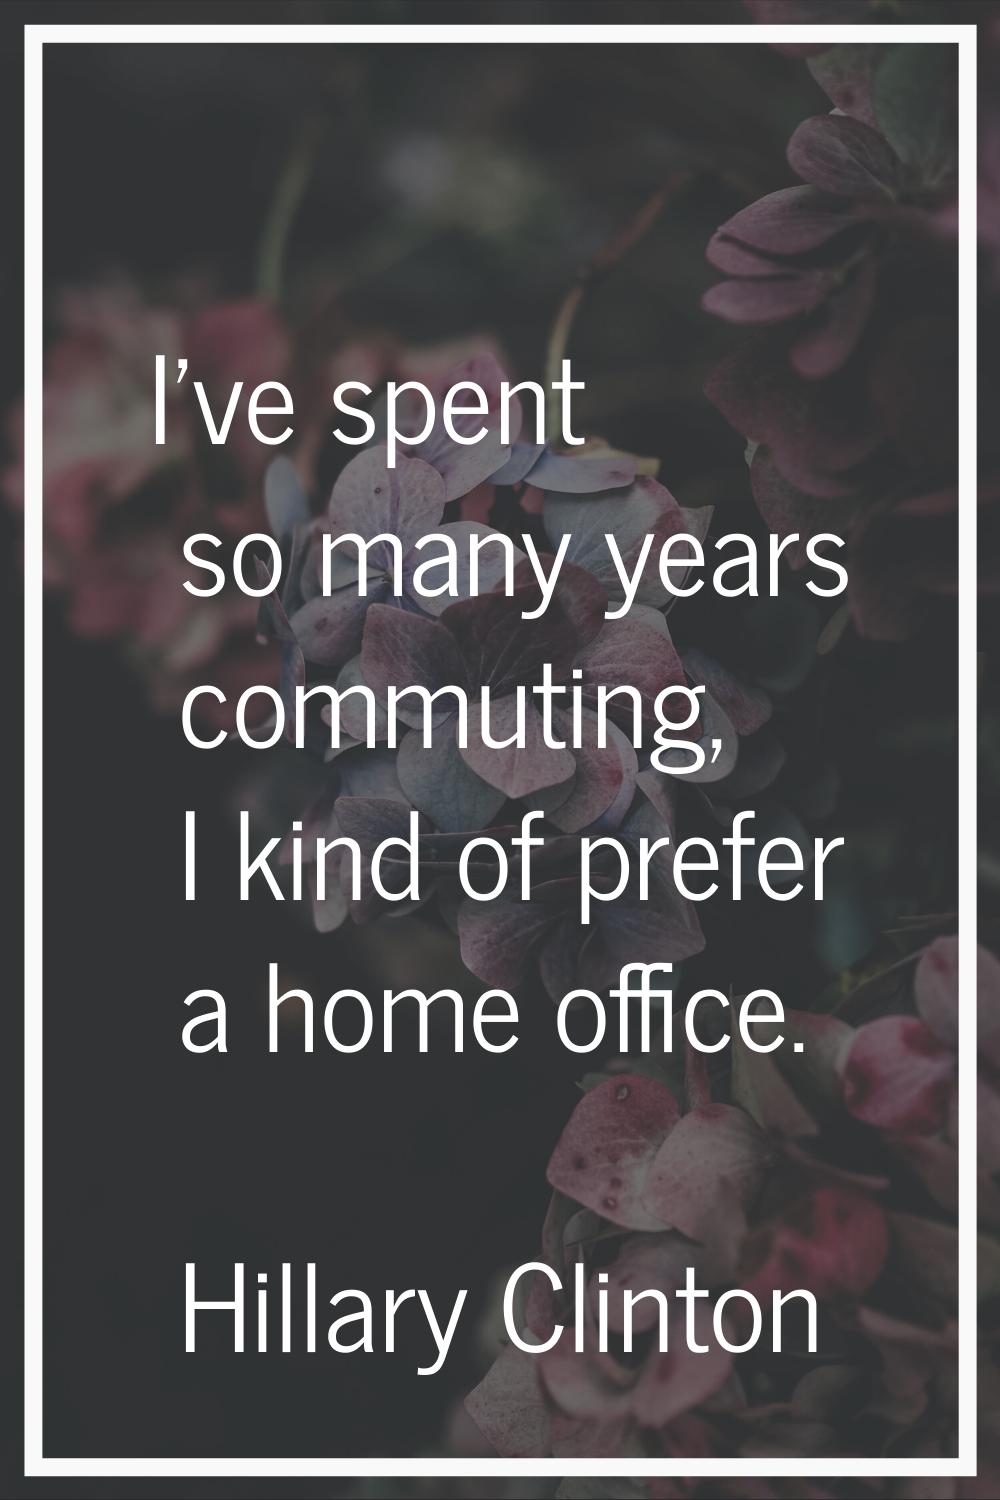 I've spent so many years commuting, I kind of prefer a home office.